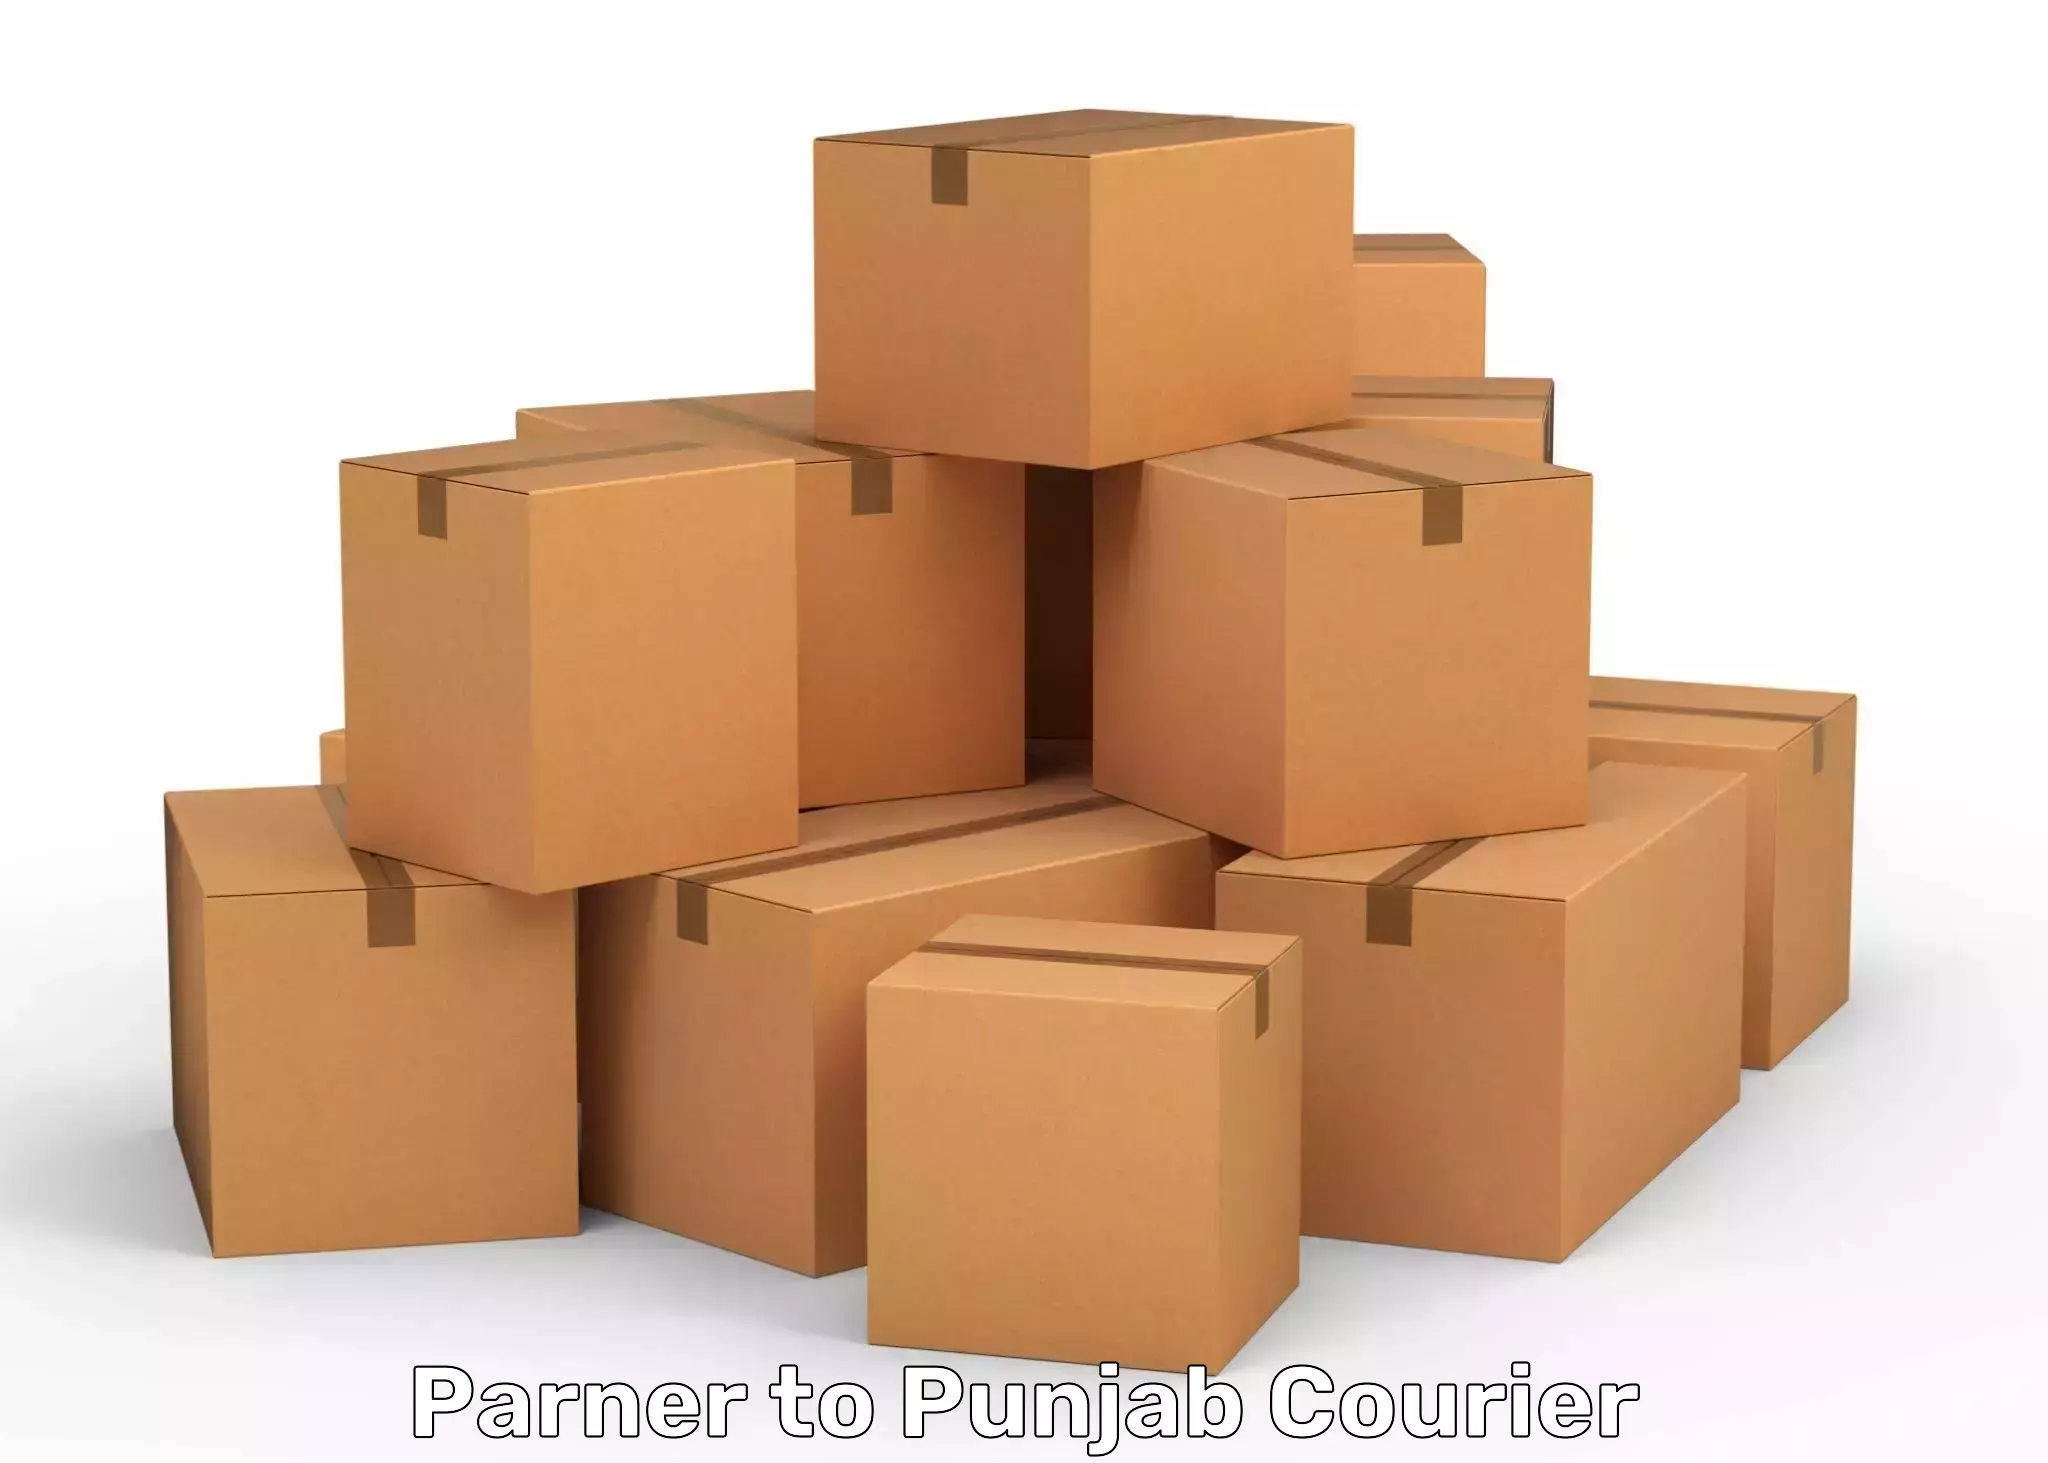 Optimized courier strategies Parner to Punjab